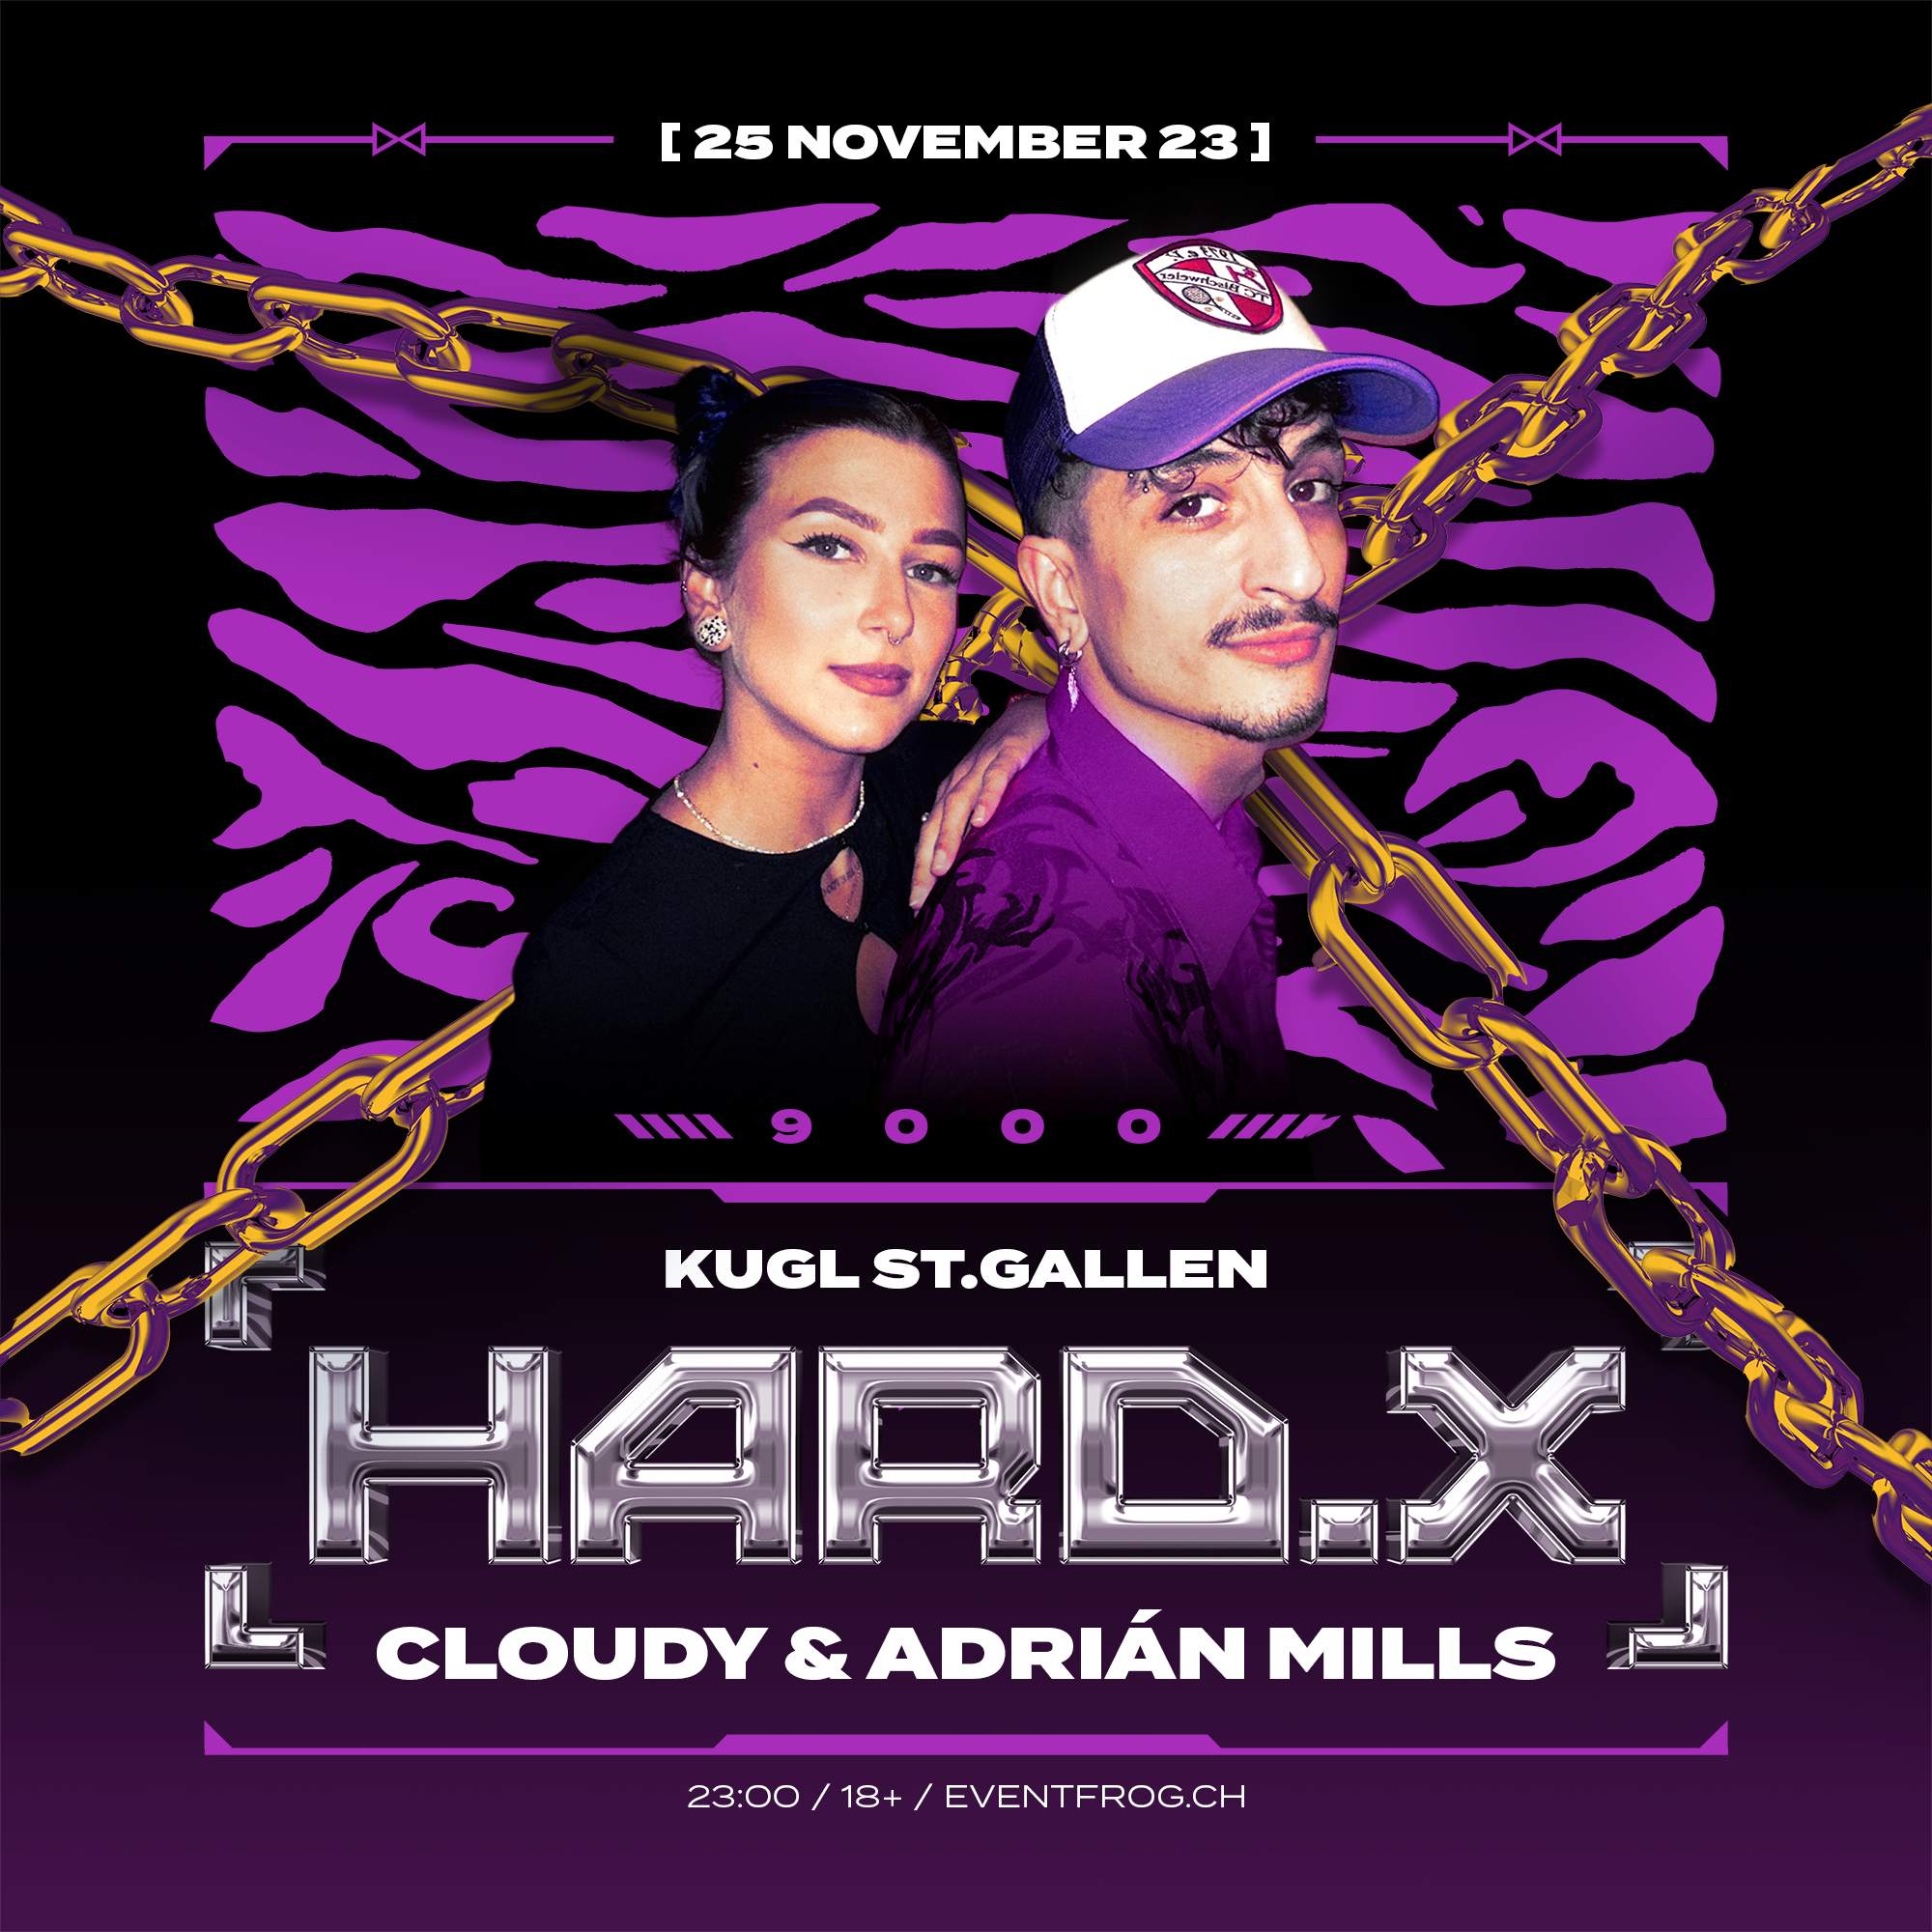 HARD.X with Cloudy, Adrián Mills - フライヤー表